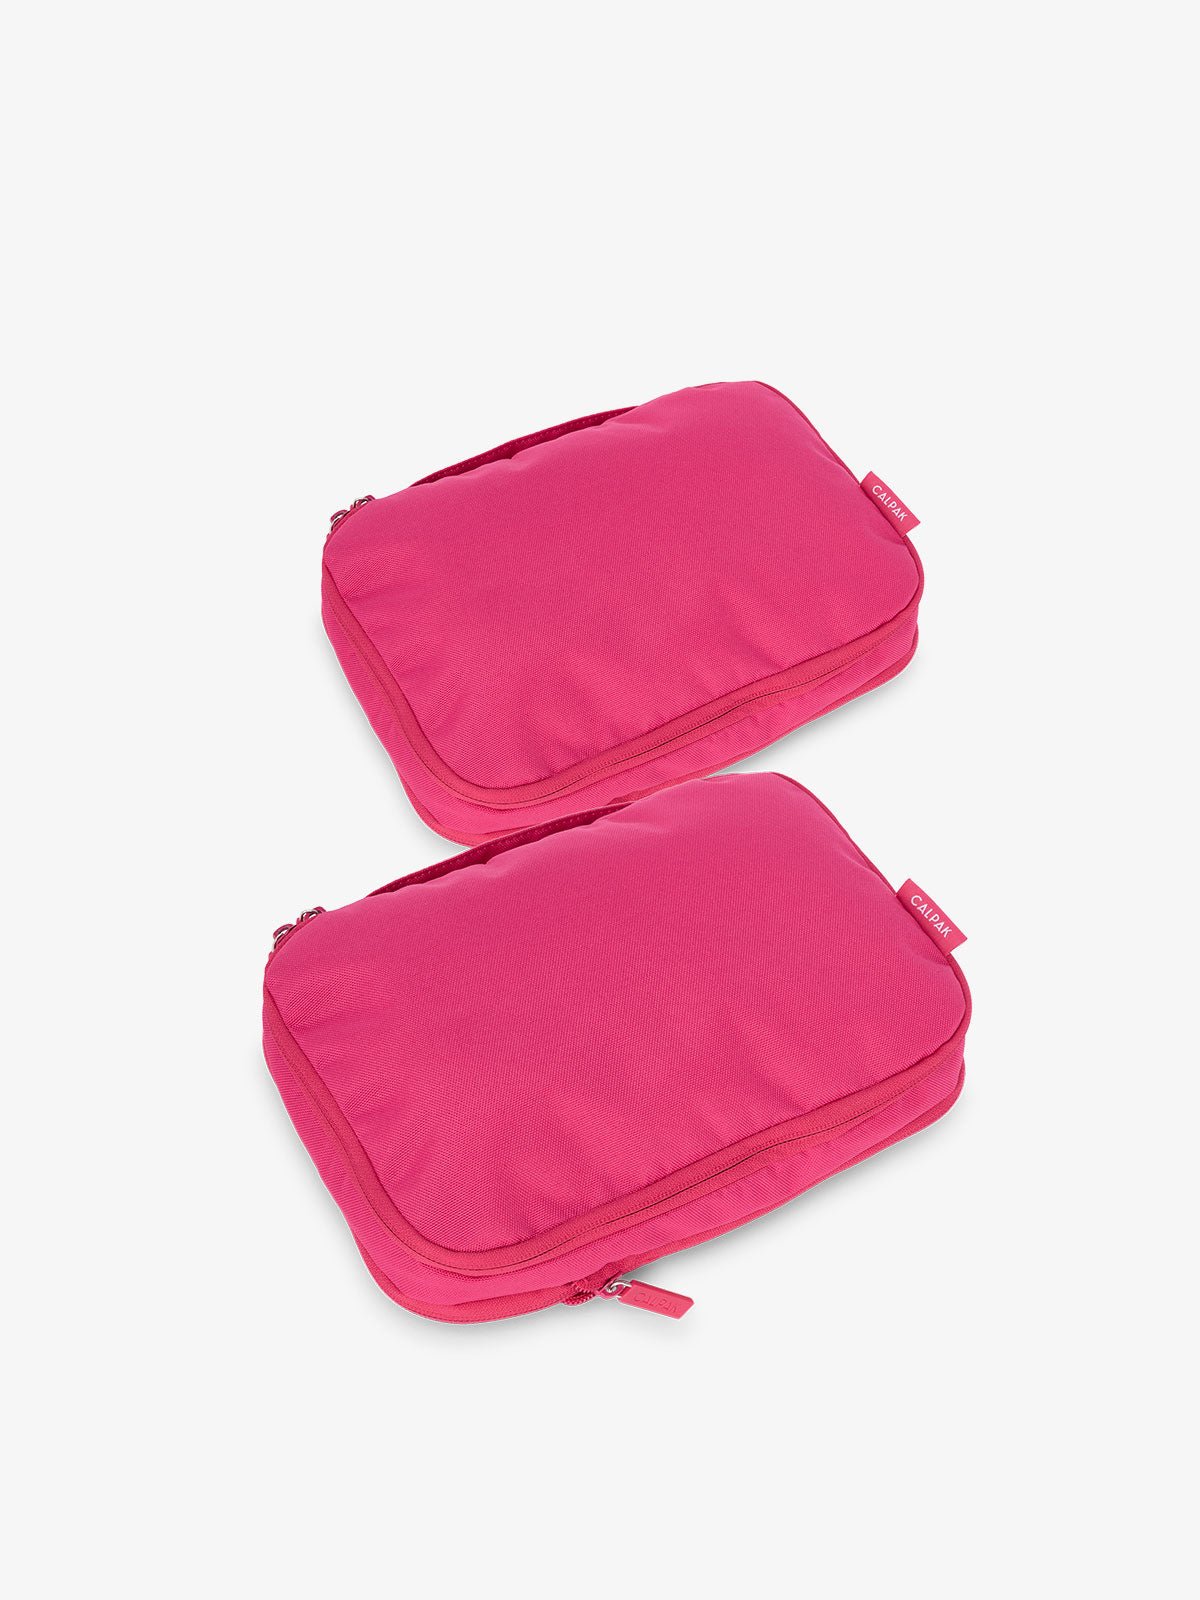 CALPAK small compression packing cubes in dragonfruit